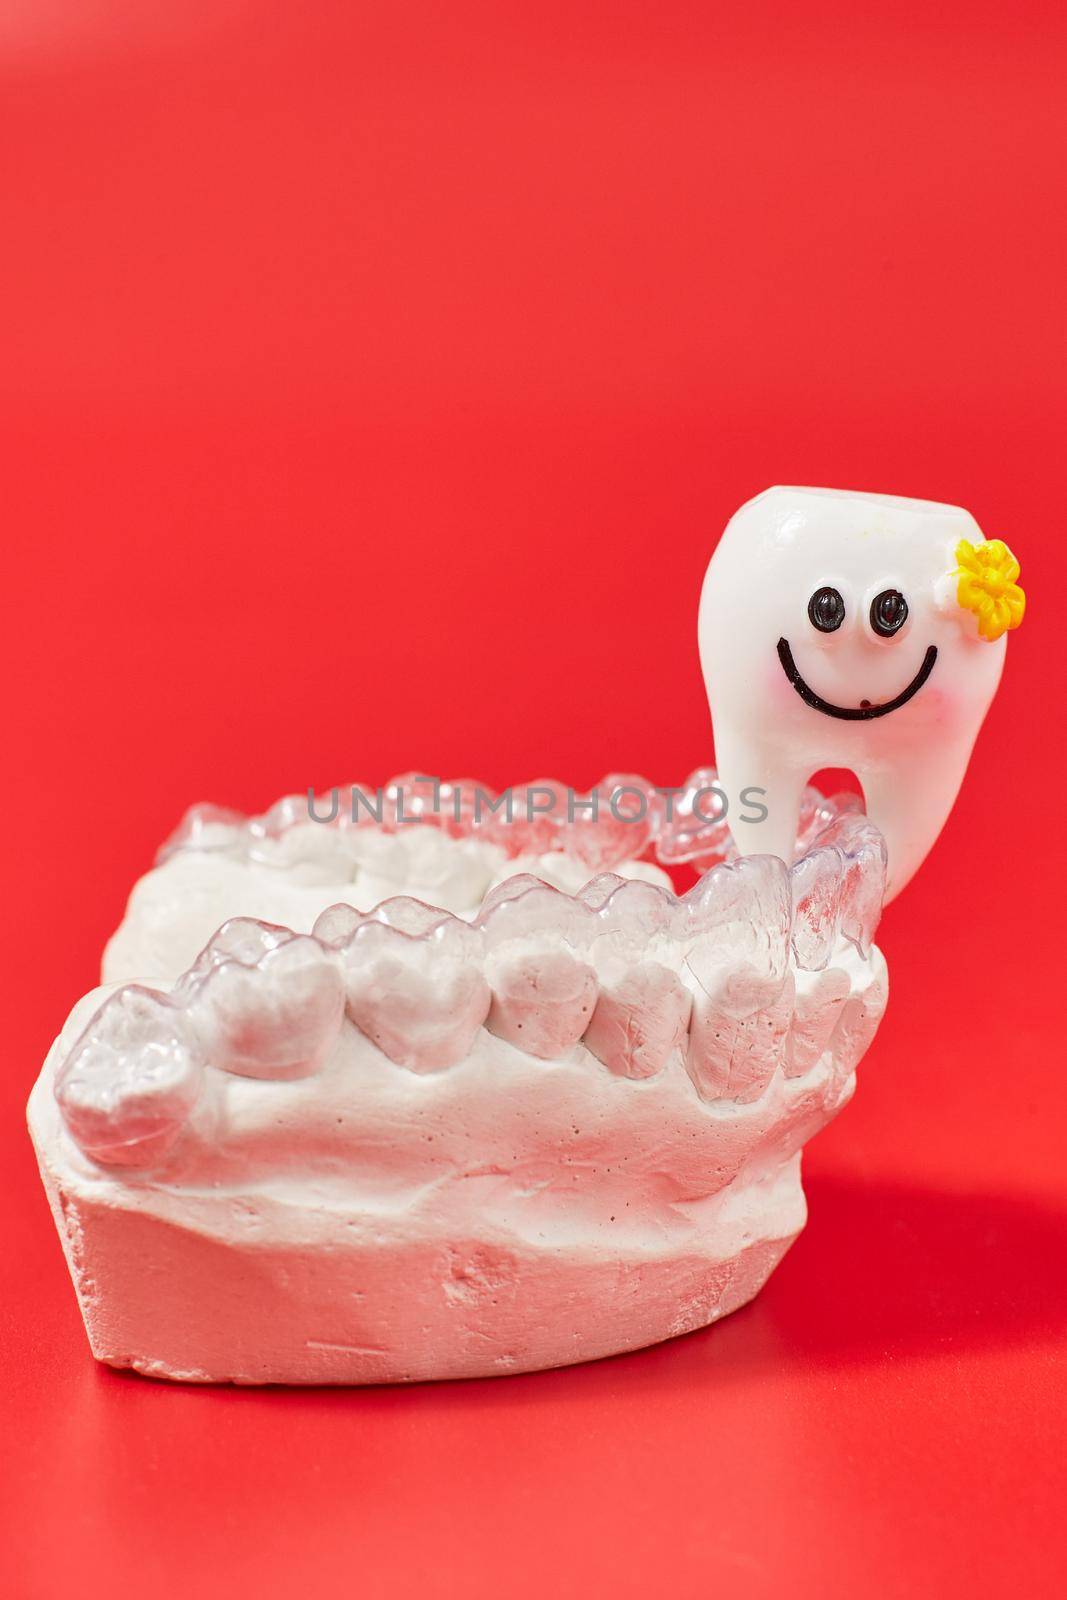 Joyful tooth on a red background in invisible dental aligners or braces aplicable for an orthodontic dental treatment by Maximusnd